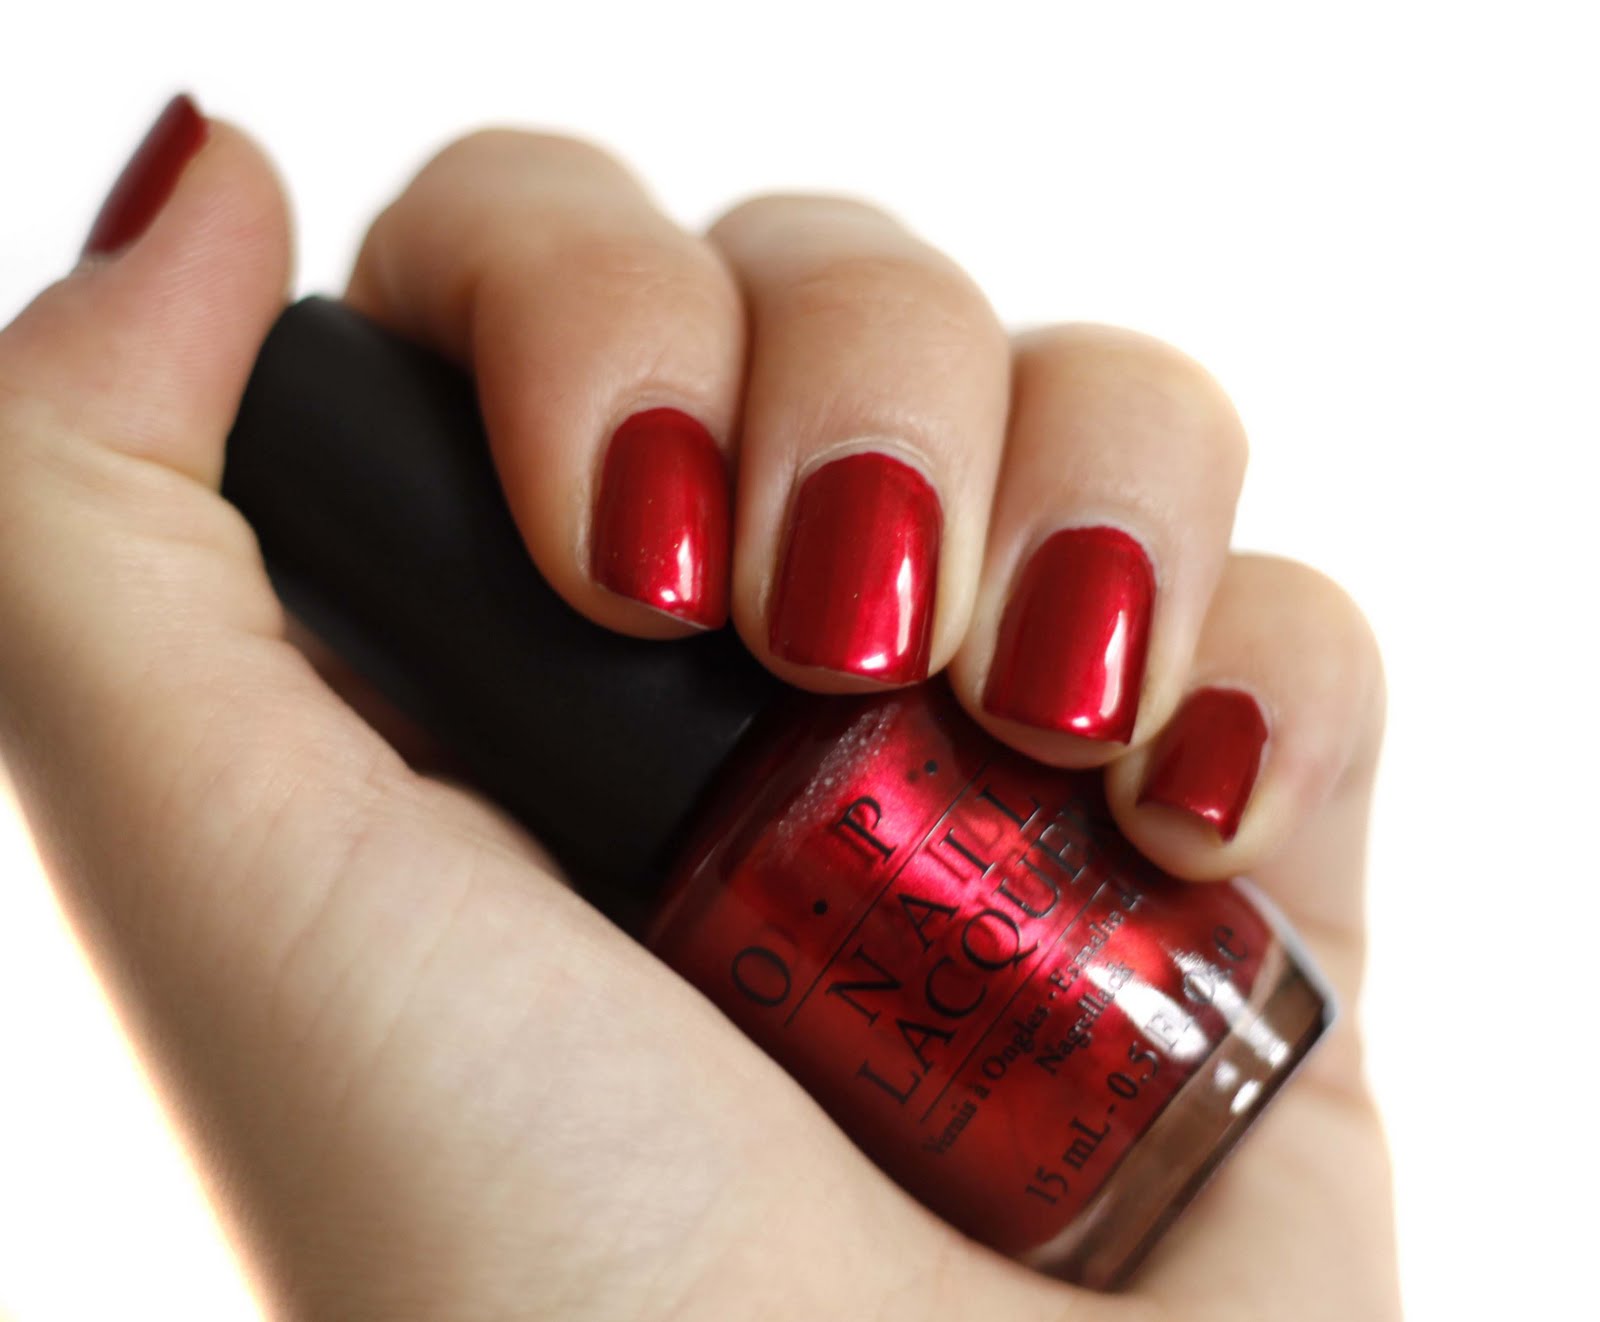 7. Butter London Nail Lacquer in "Come to Bed Red" - wide 8